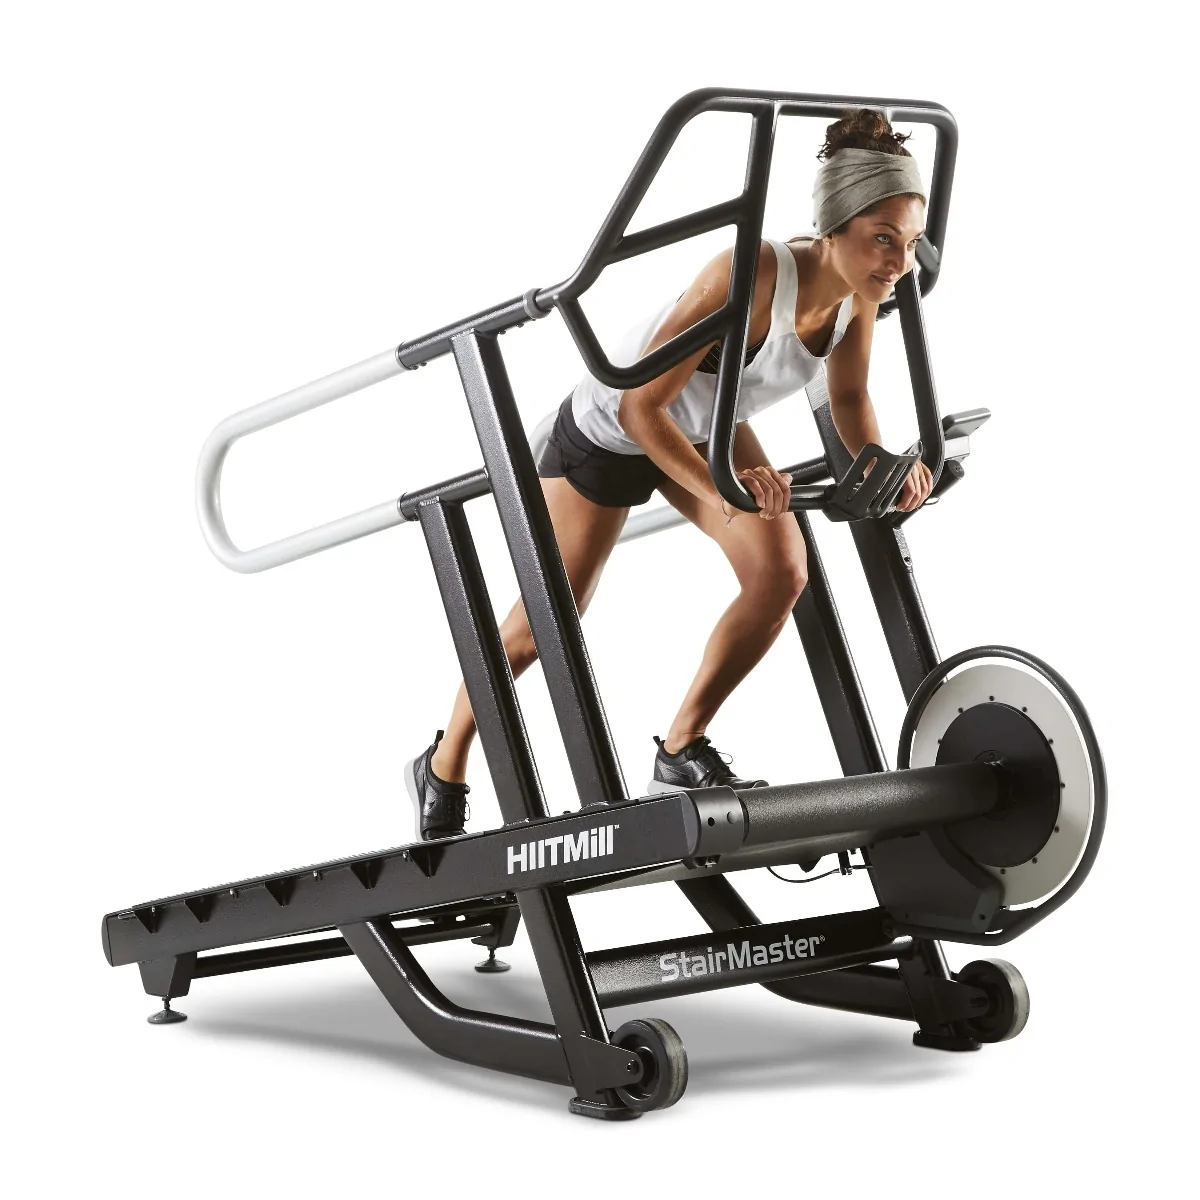 stairmaster hiitmill driving drill